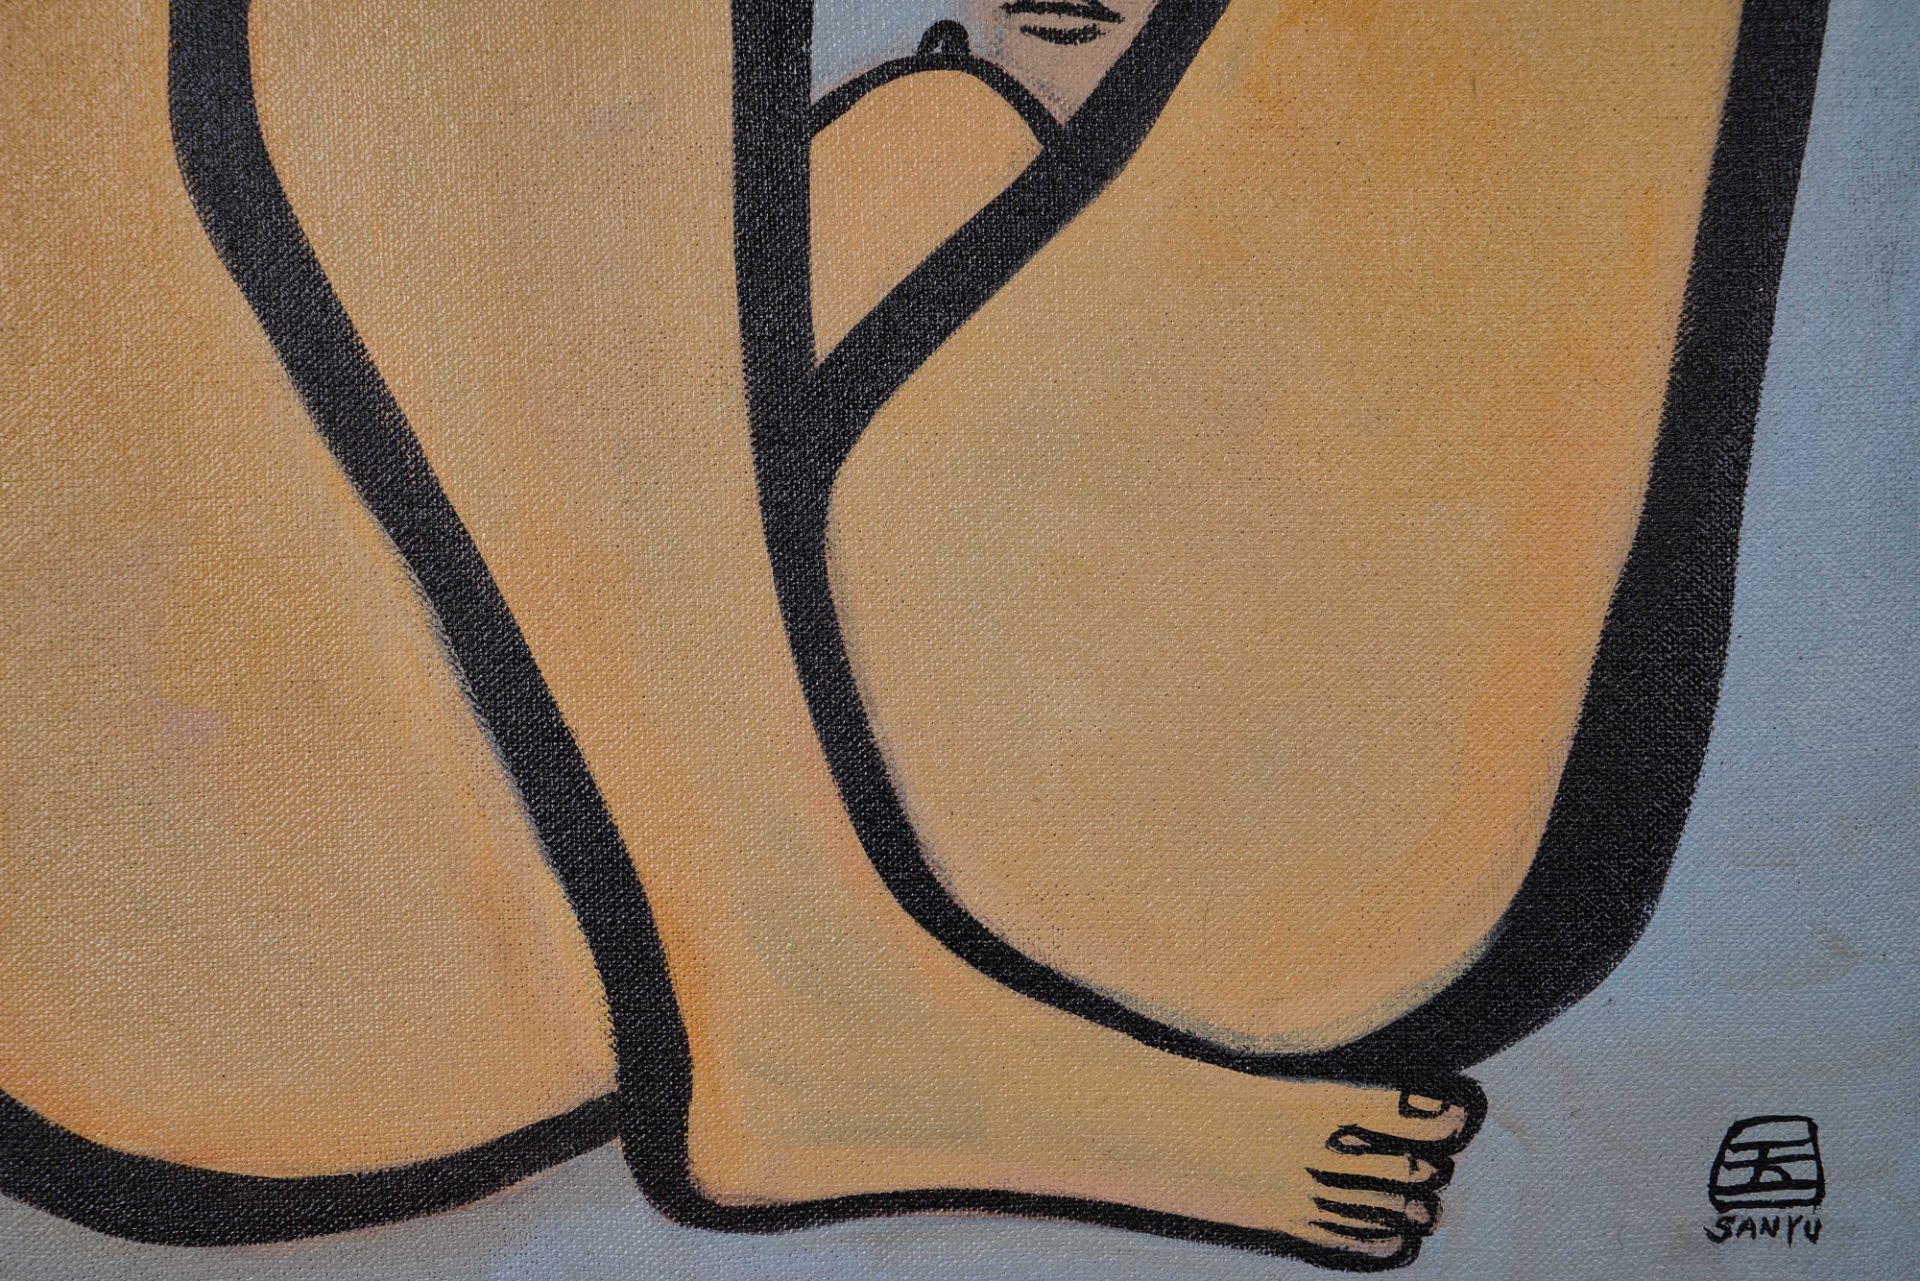 Sanyu (1895-1966), Oil Painting - Image 4 of 6